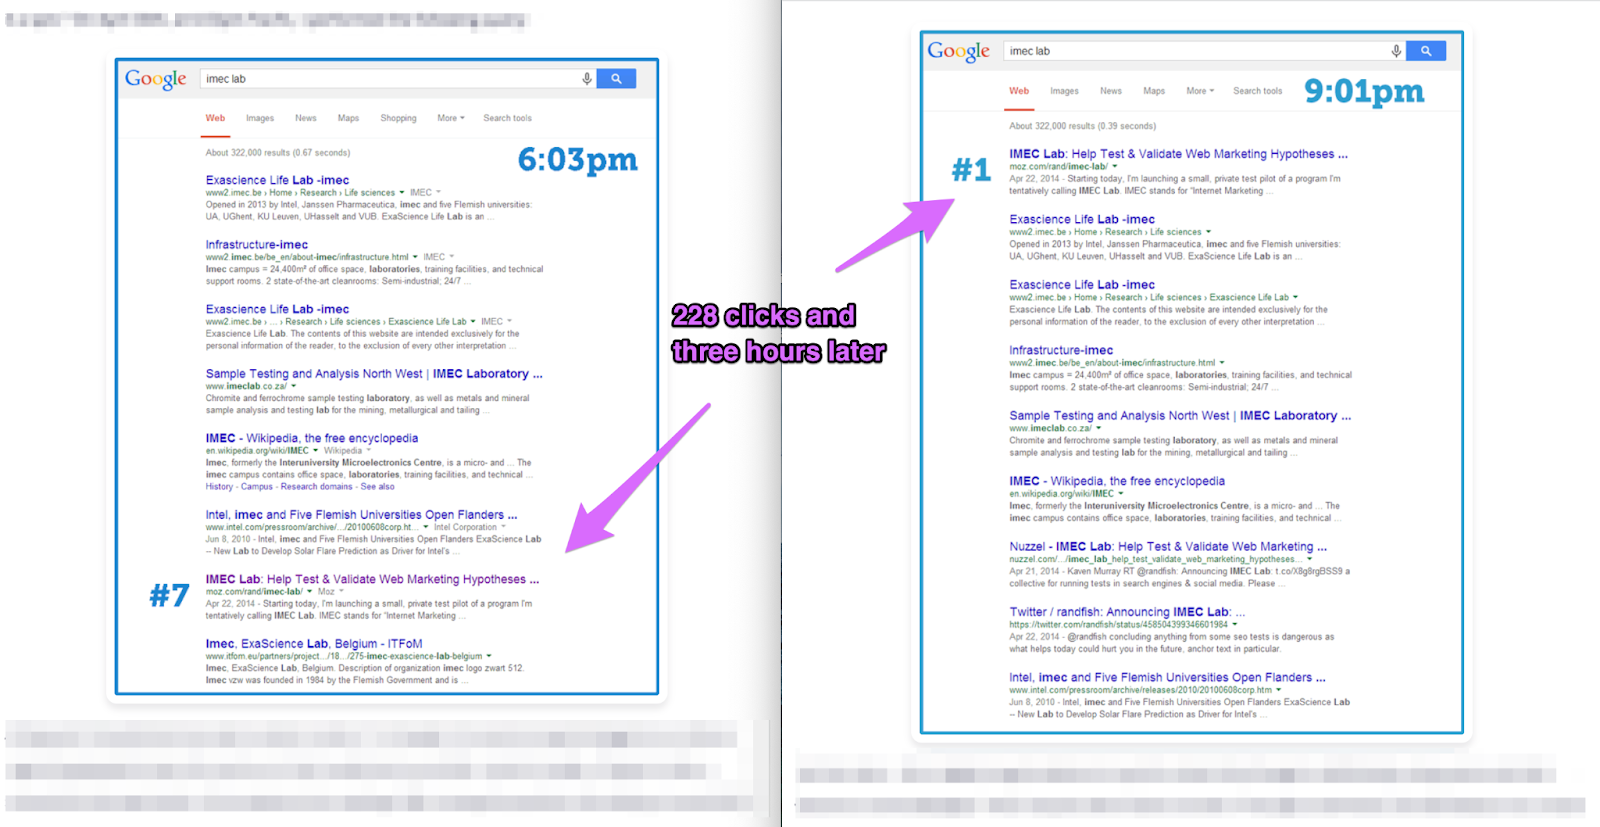 Rand fishkin click test before and after ctr manipulation